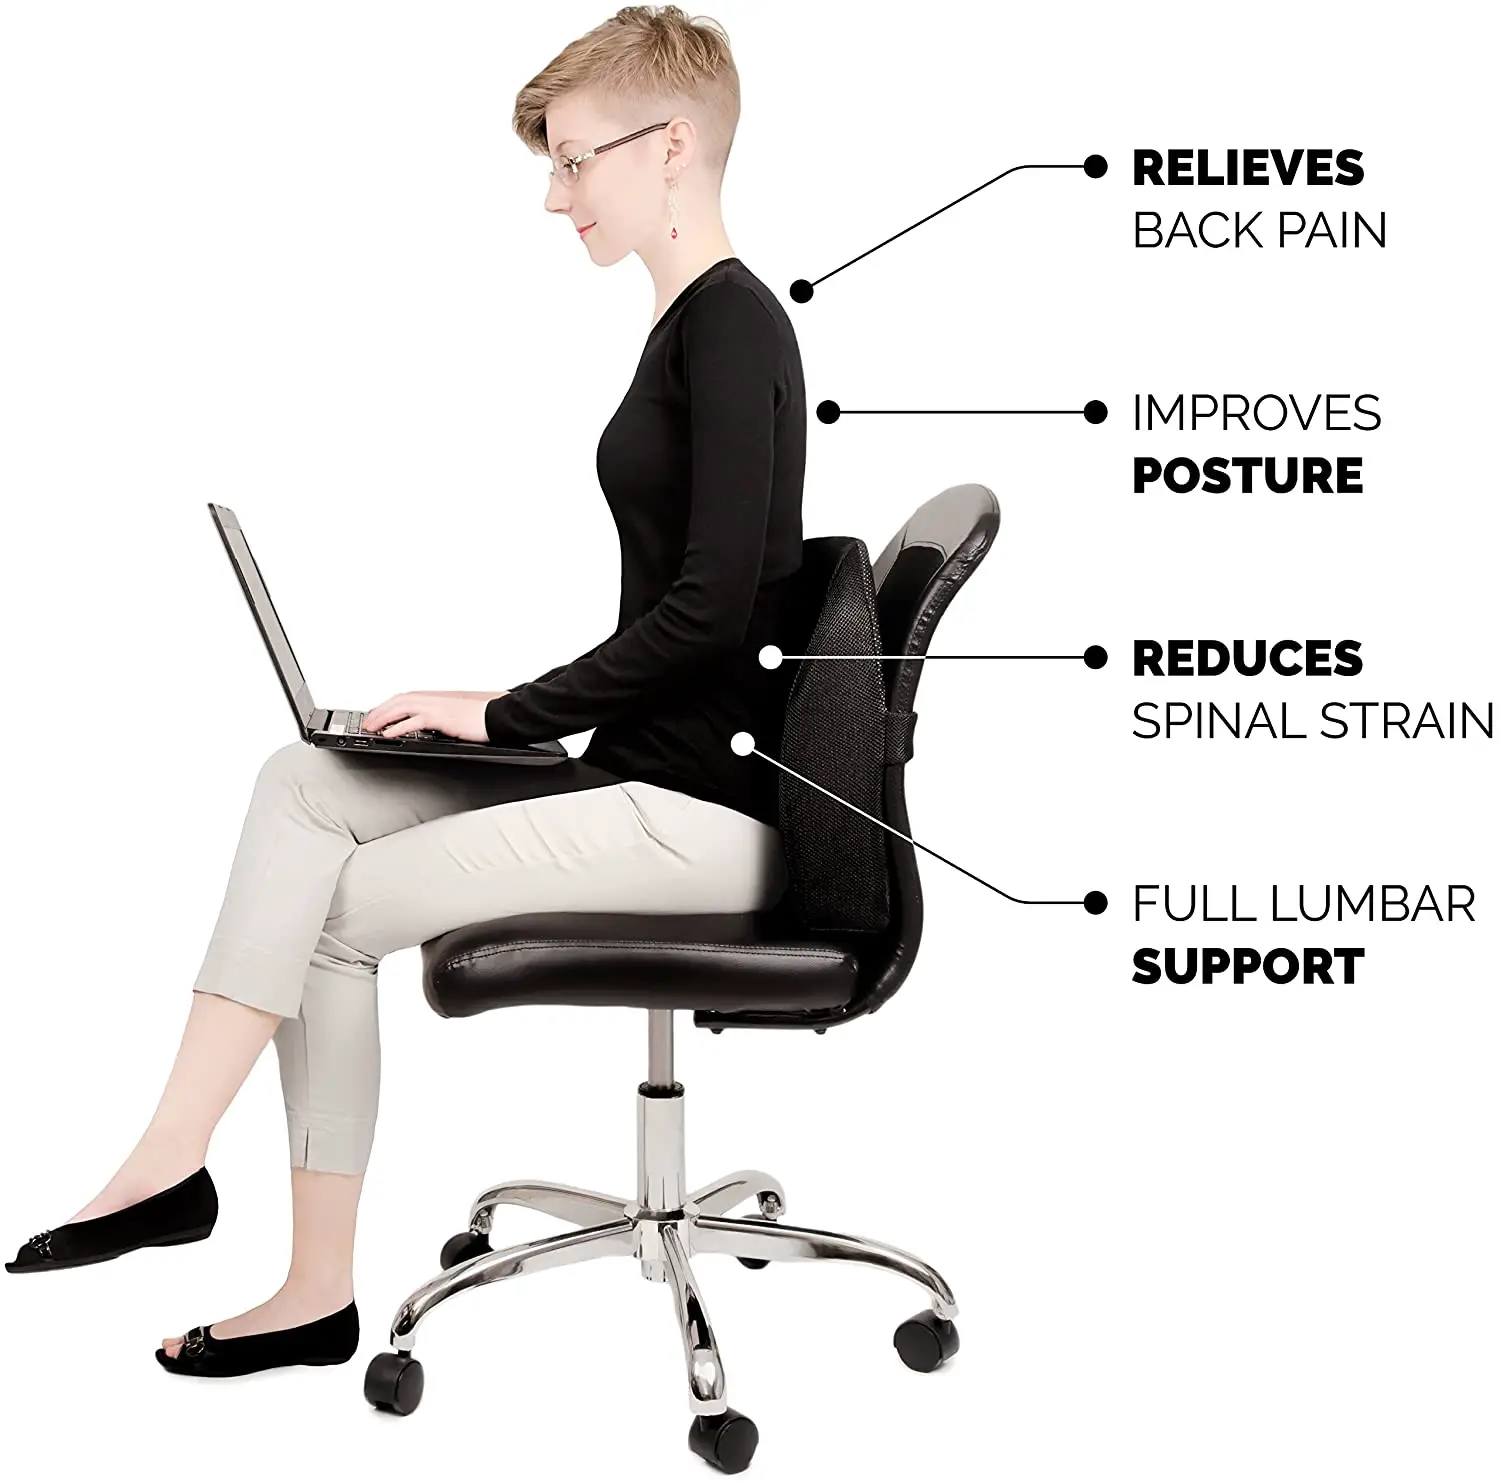 Lower Back Pain After Sitting In Chair. 5 Simple Ways to ...